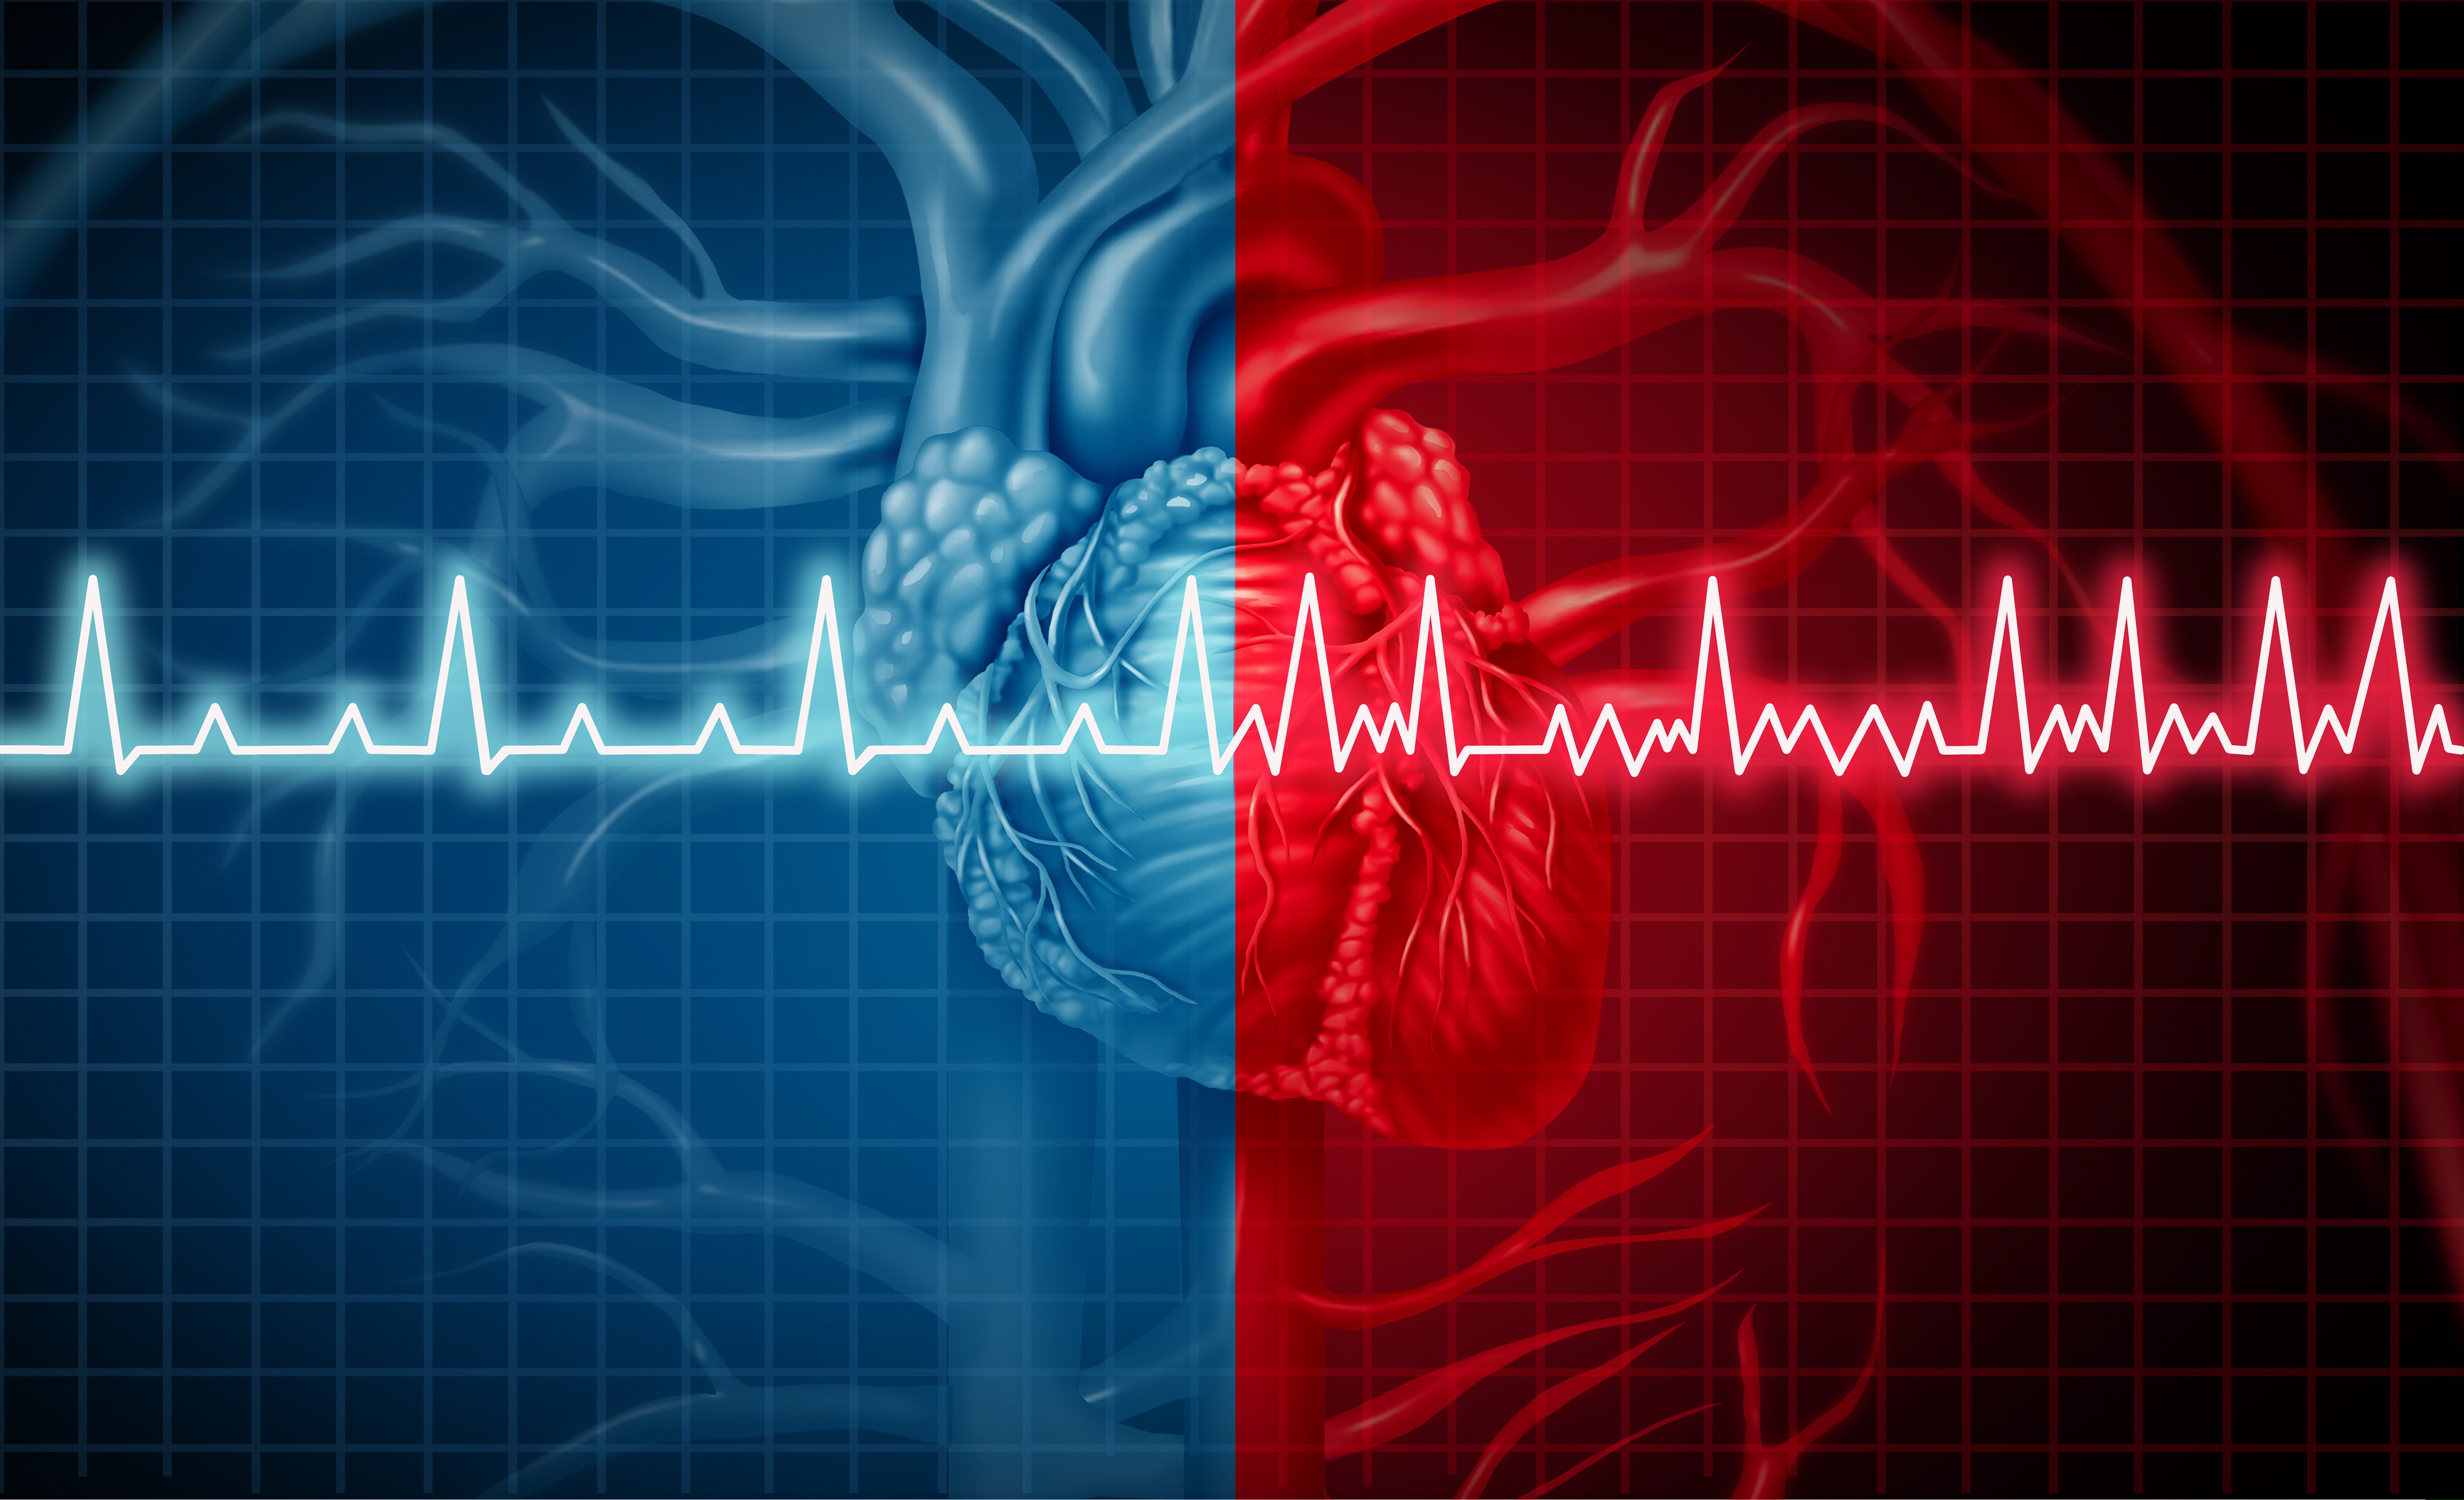 What Causes AFib and can it be Prevented?